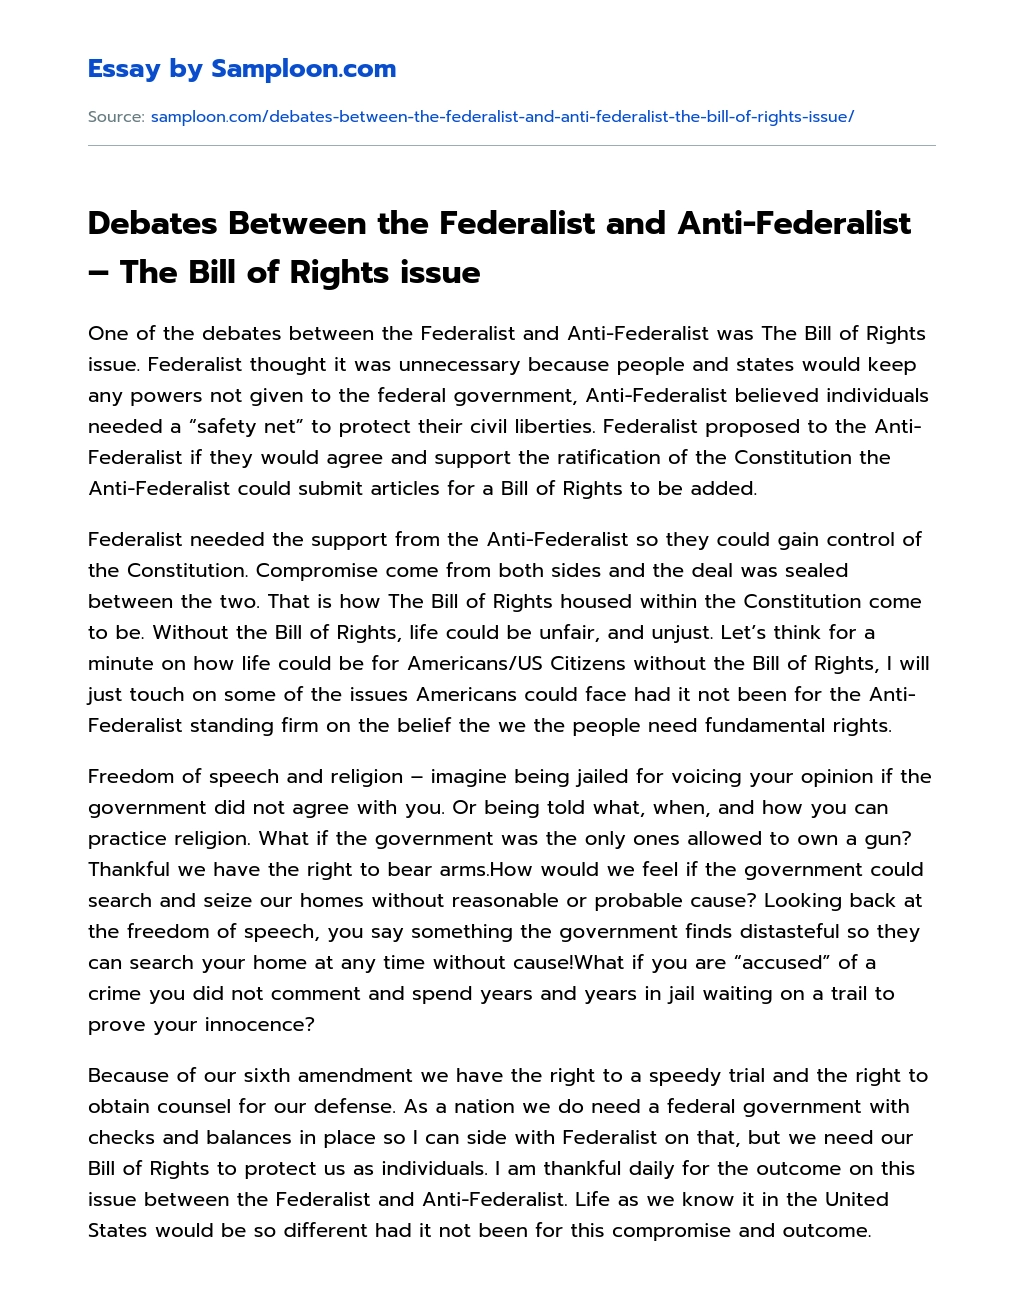 Debates Between the Federalist and Anti-Federalist – The Bill of Rights issue essay